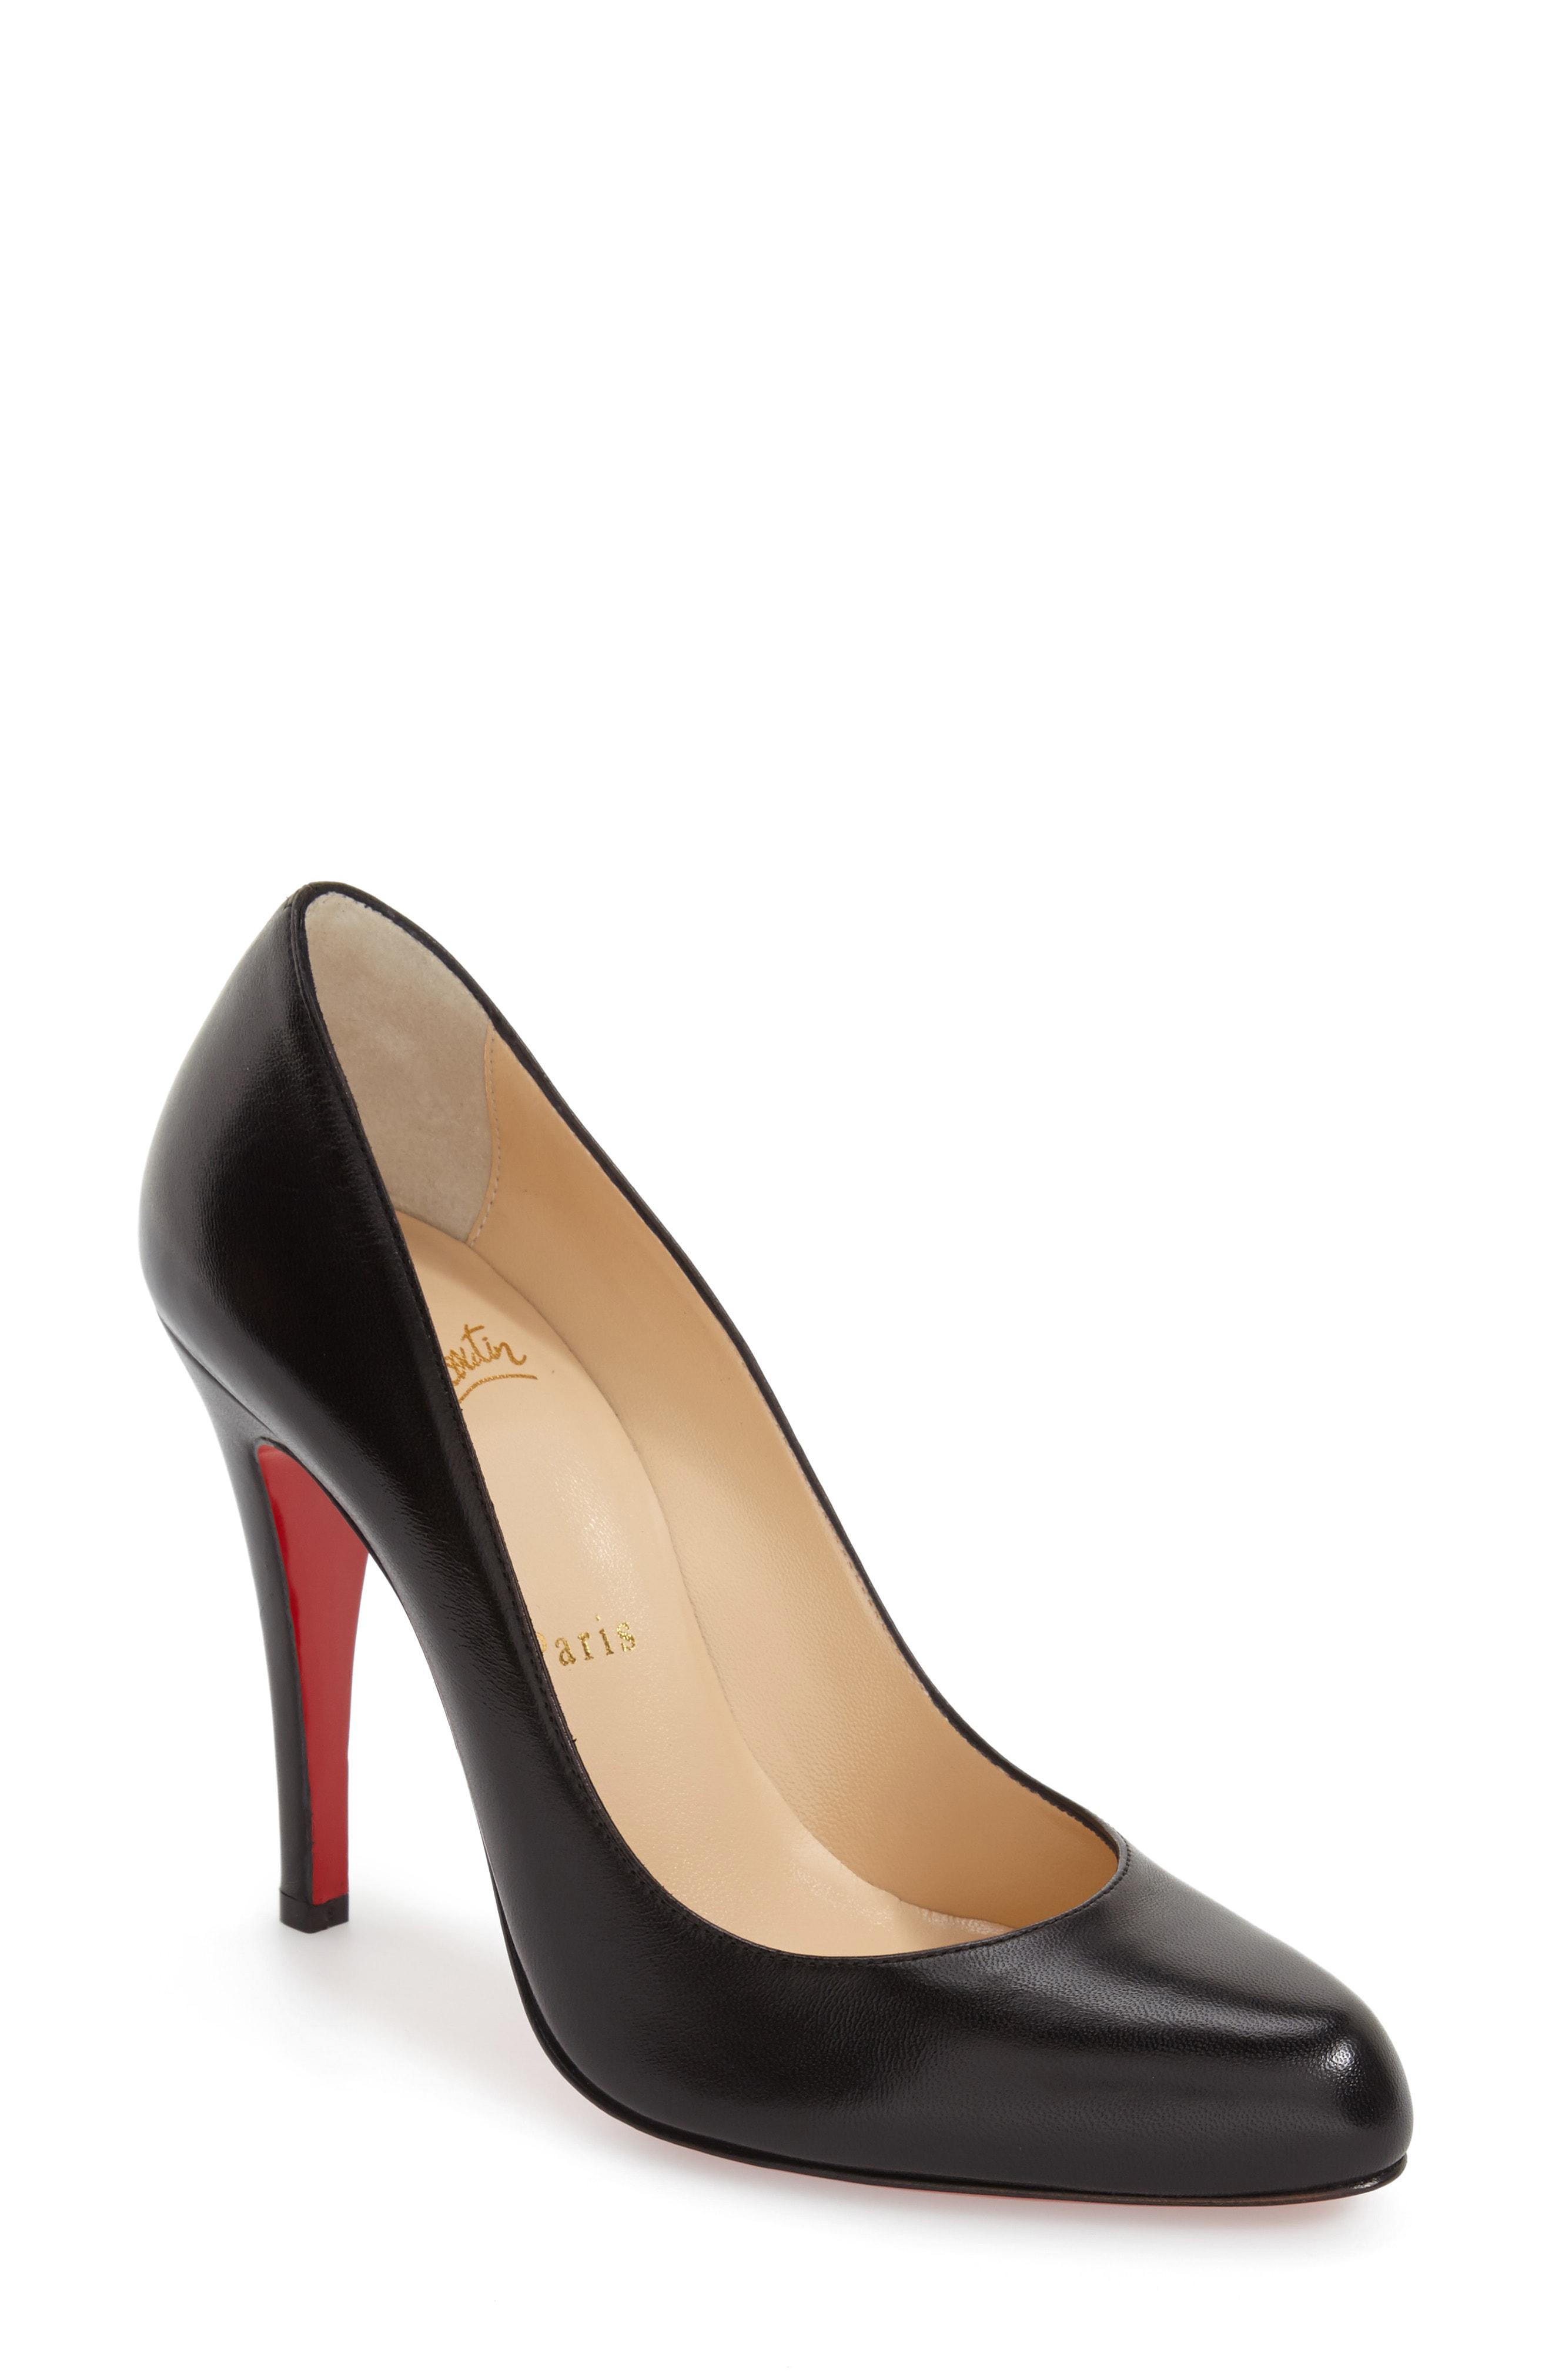 Lyst - Christian Louboutin Decollete 868 Leather Pumps in Black - Save 2.877697841726615%